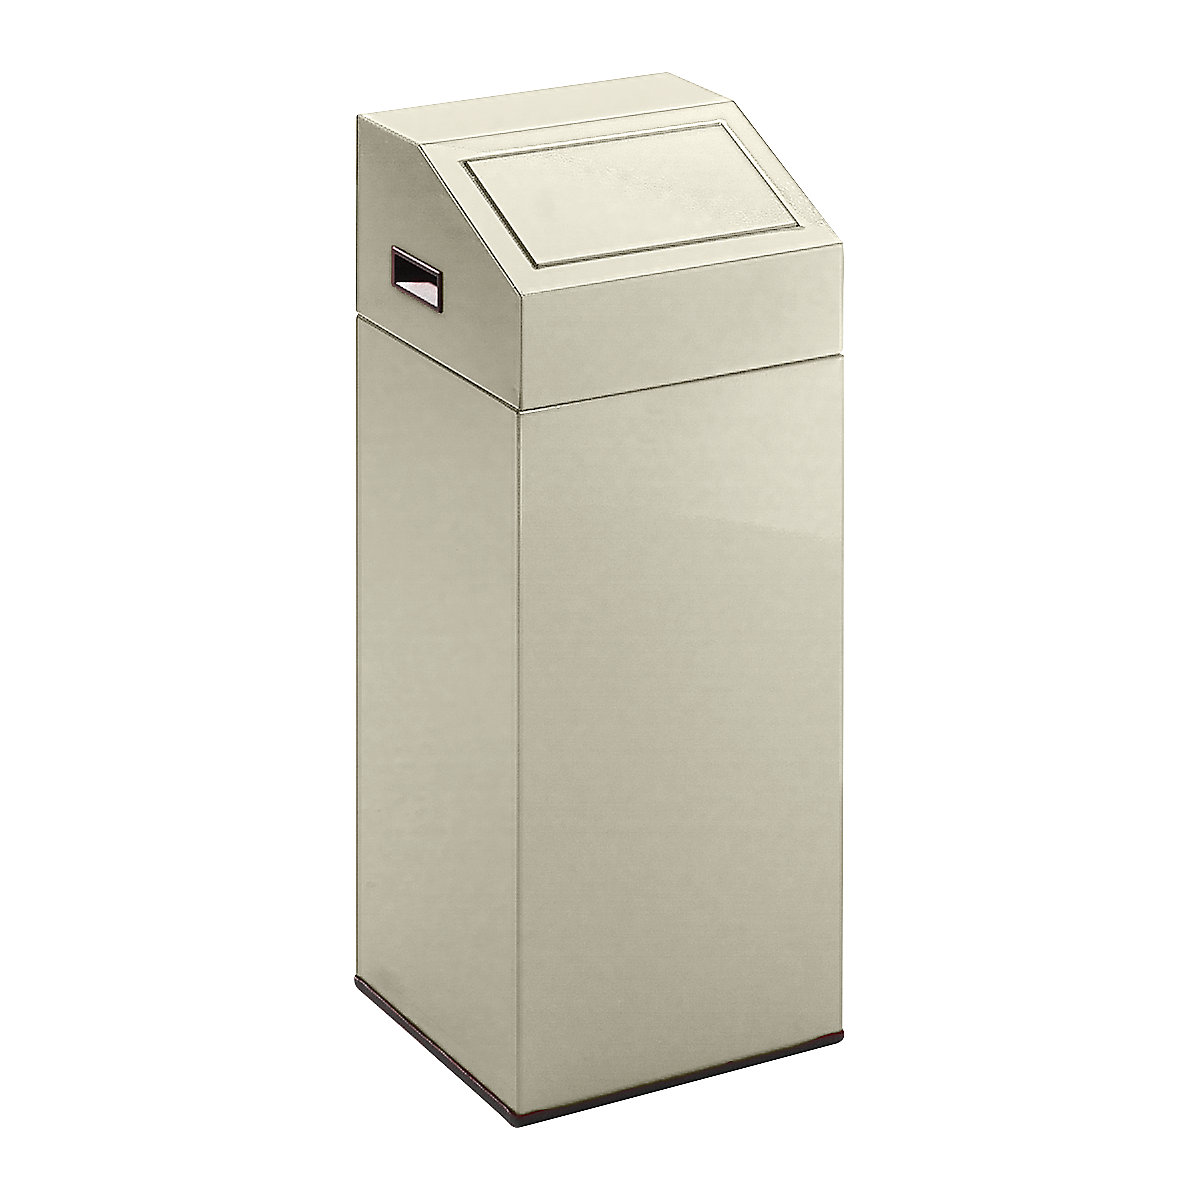 Recyclable waste collector – eurokraft pro, capacity 45 l, WxHxD 320 x 790 x 320 mm, pebble grey